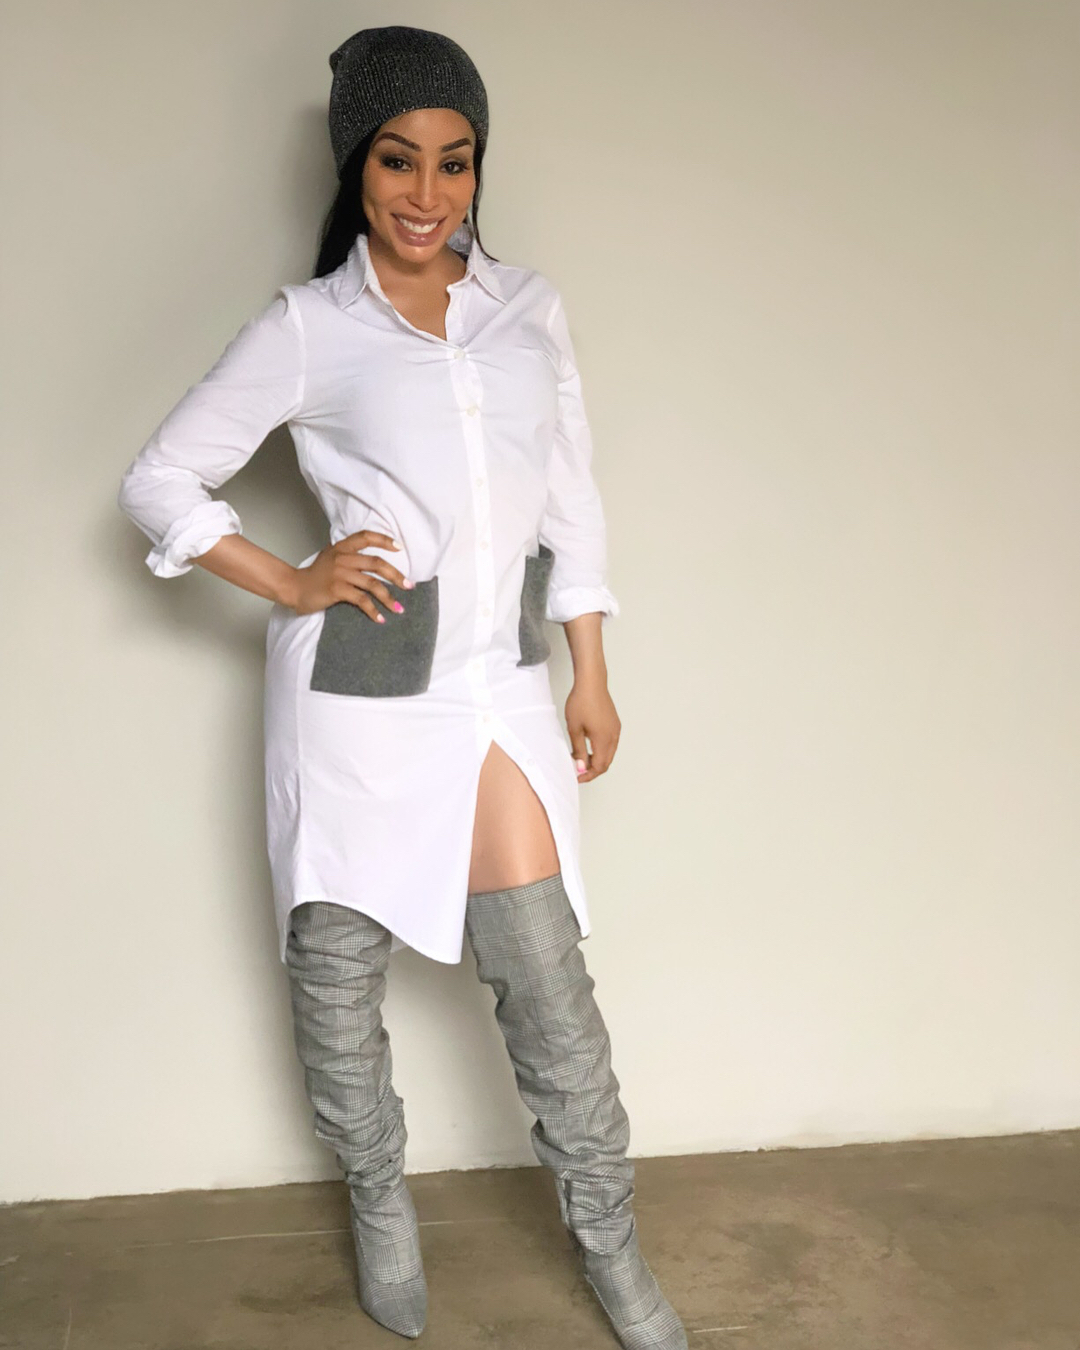 Khanyi Mbau showing off in latest pictures | News365.co.za